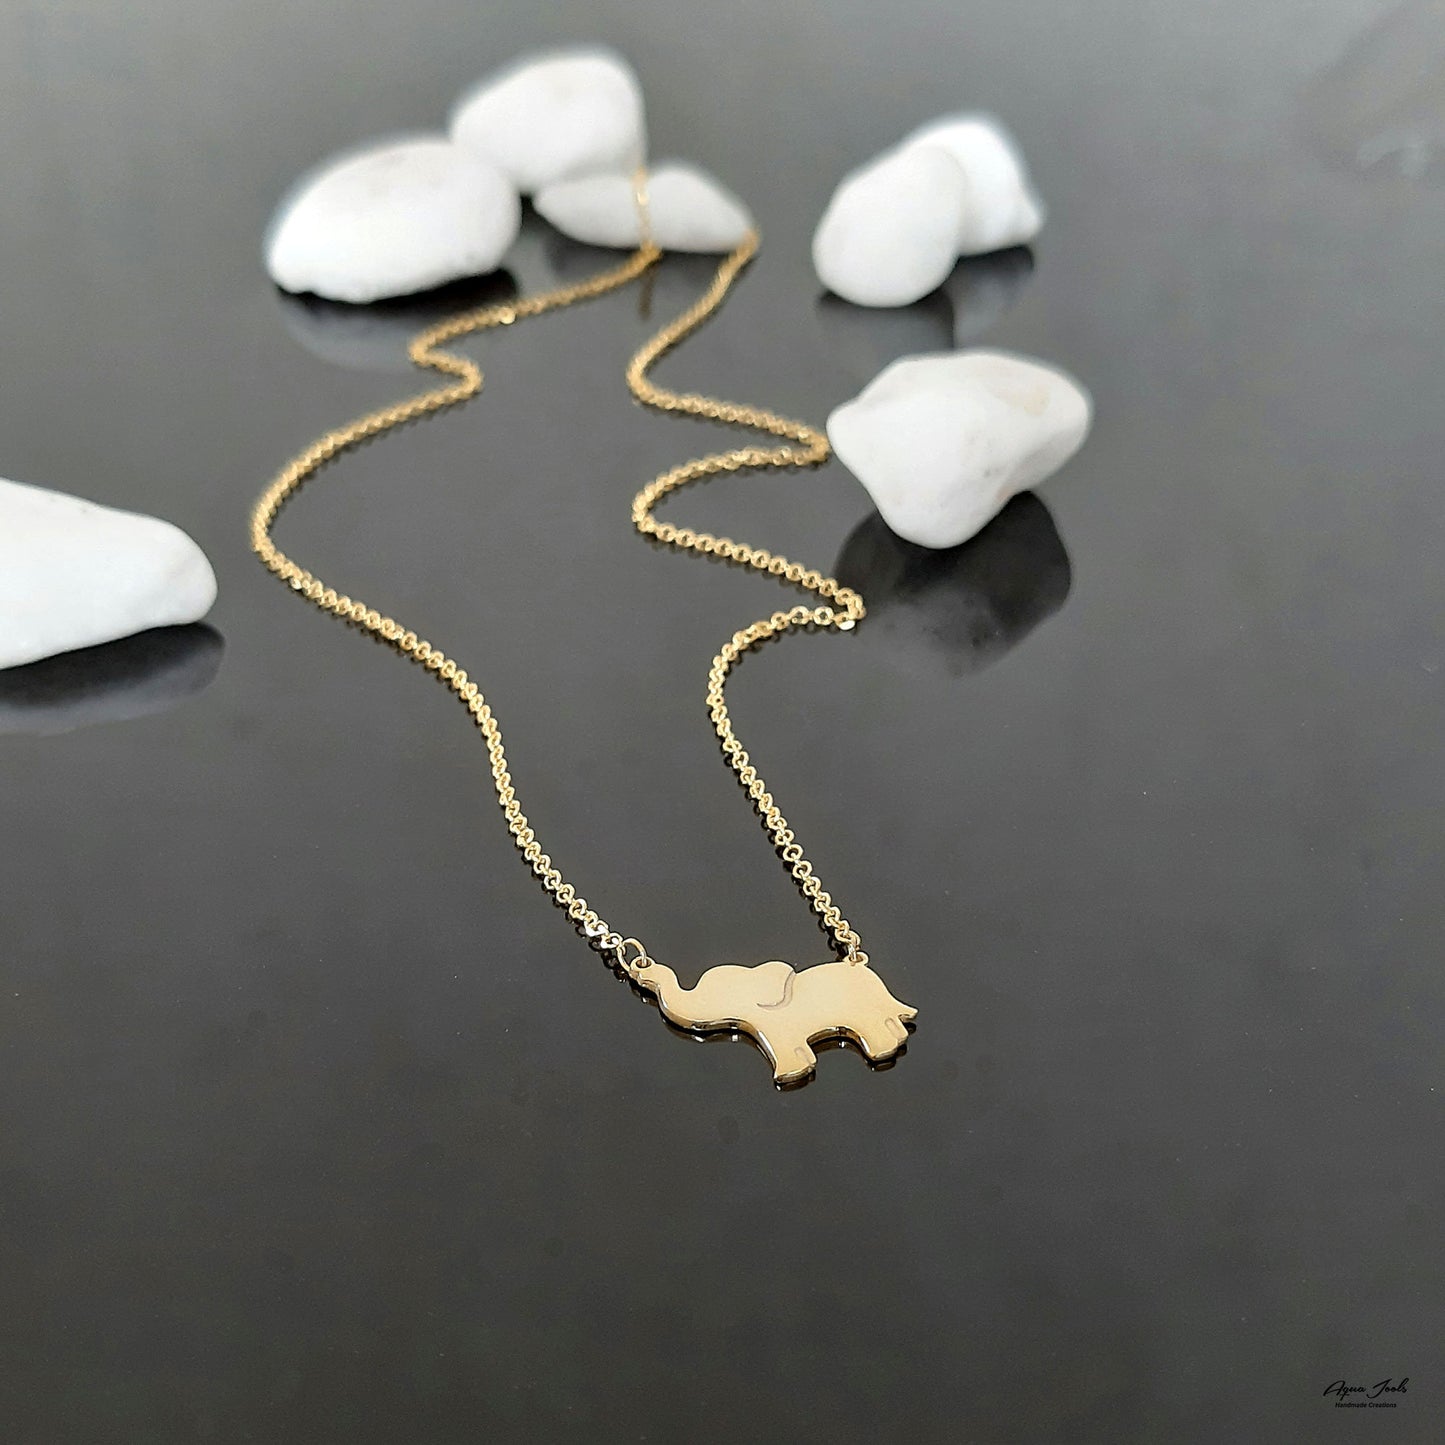 Solid Gold Elephant Necklace